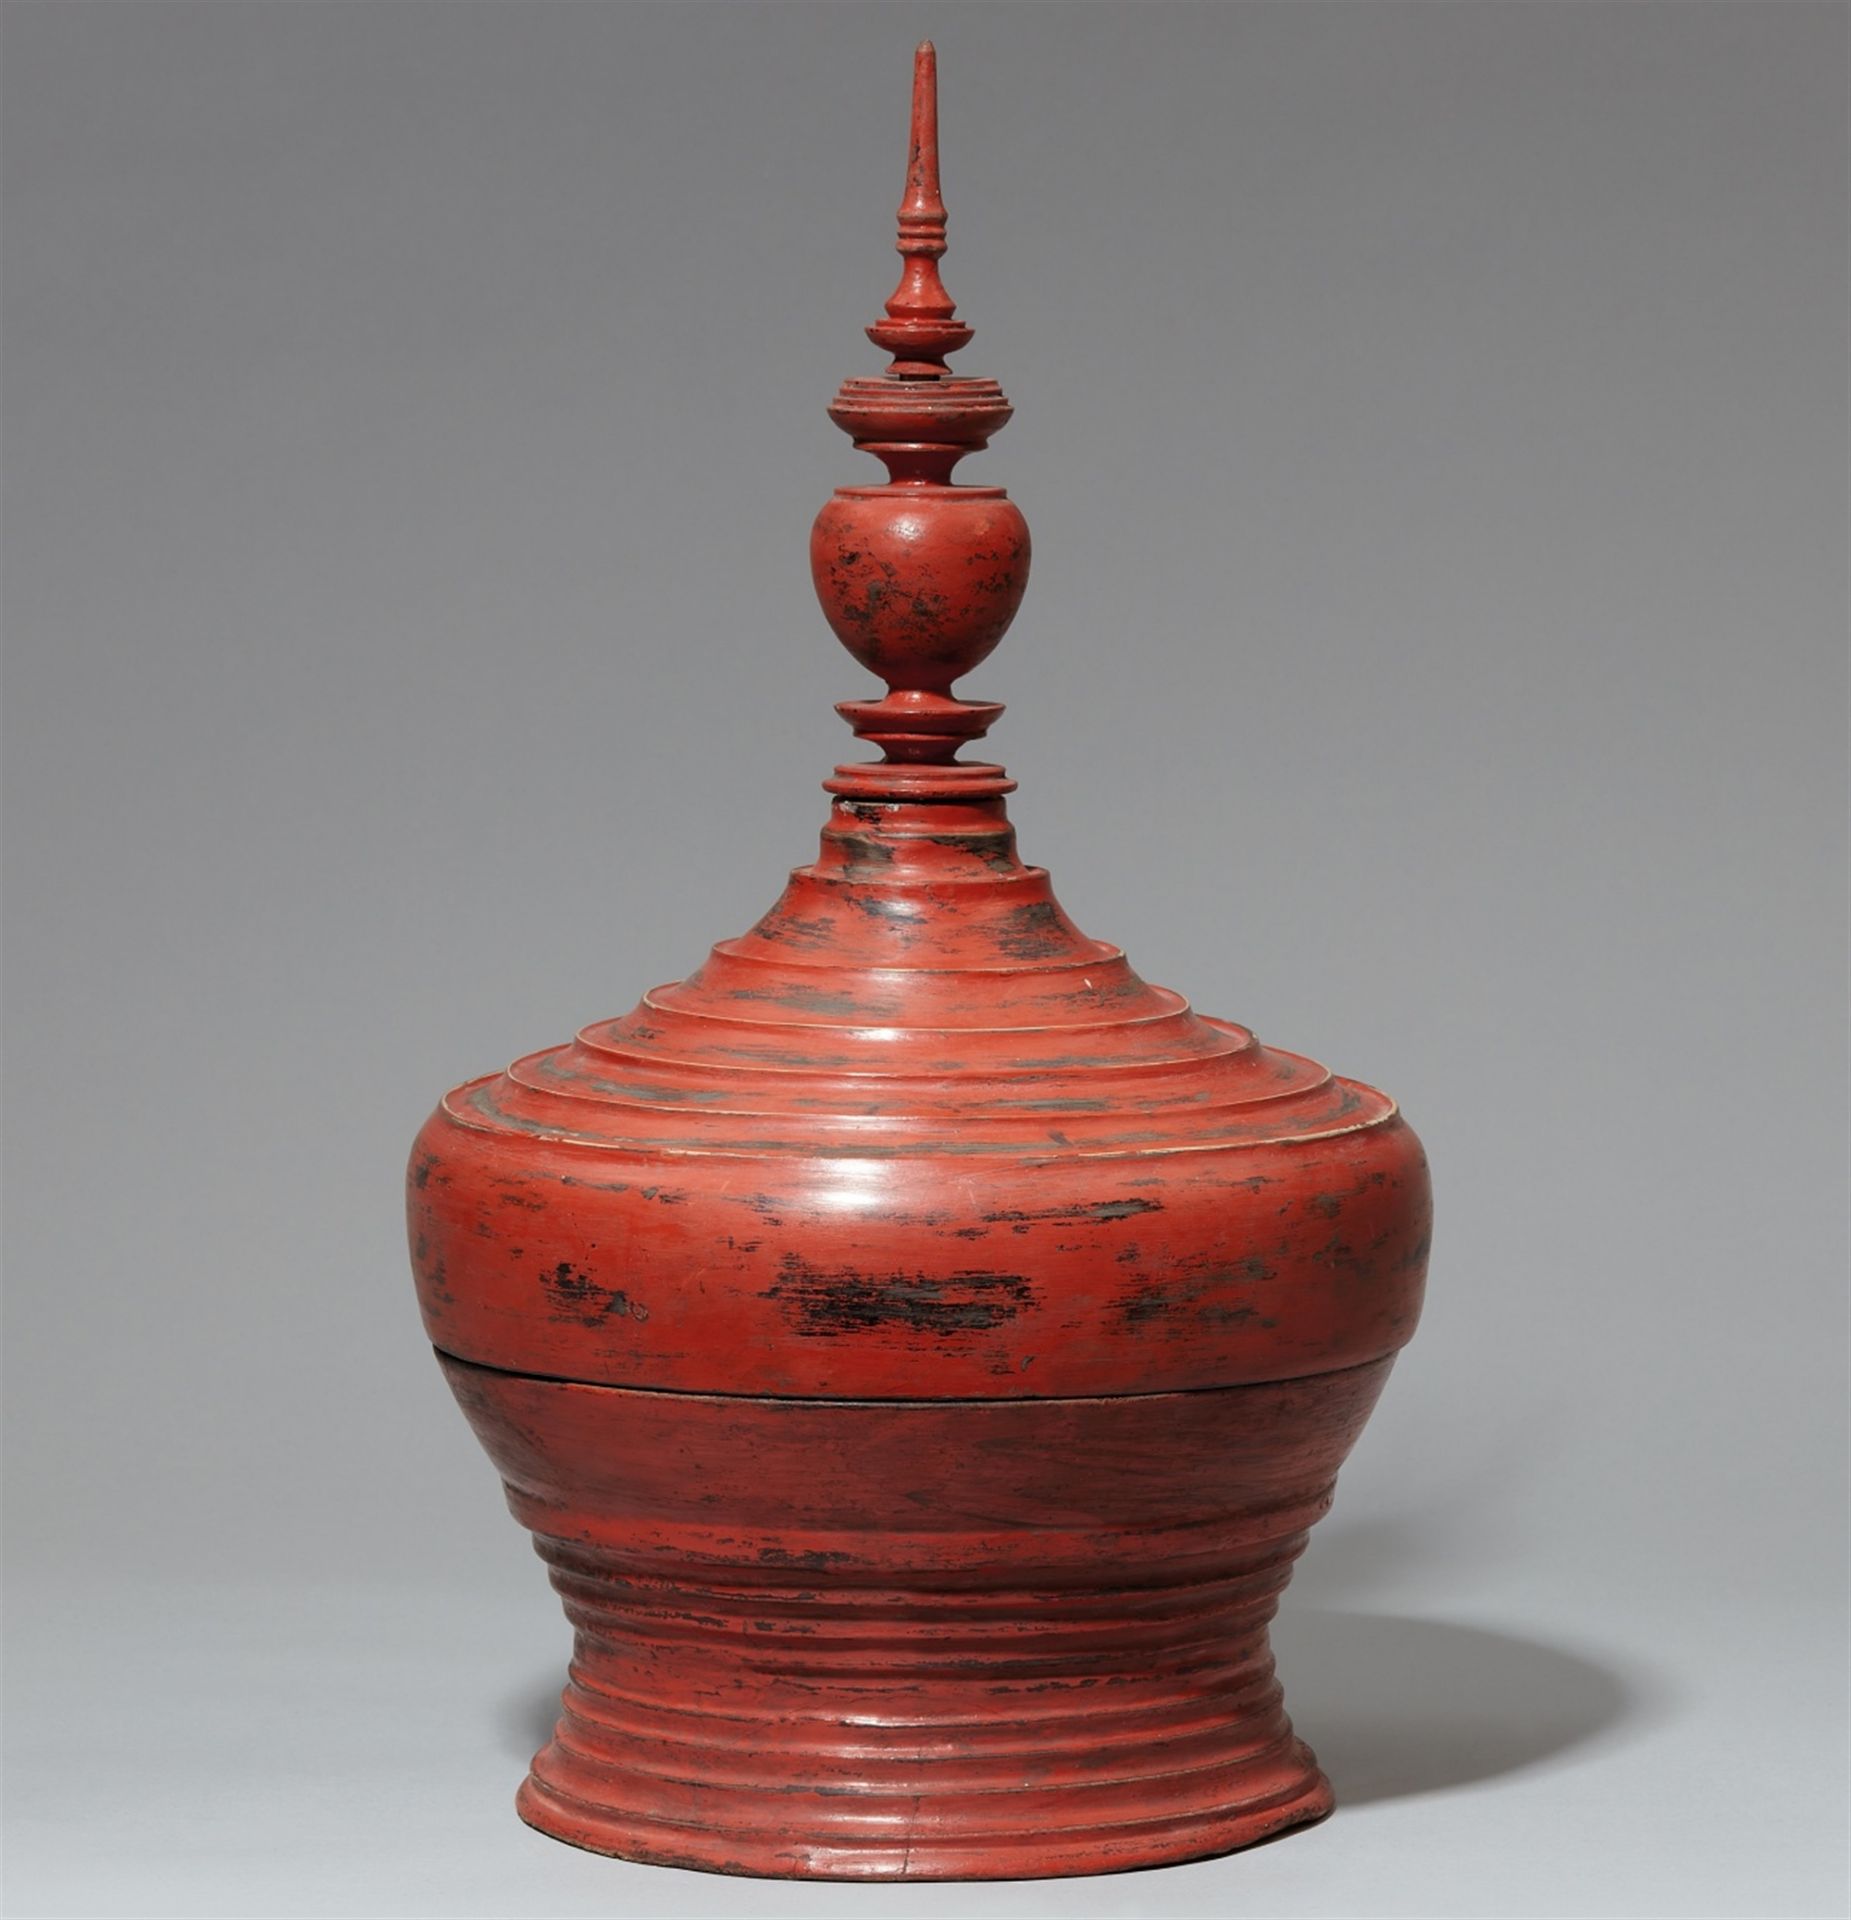 A large Shan state wood and lacquer offering vessel (hsun ok). Burma. 20th century